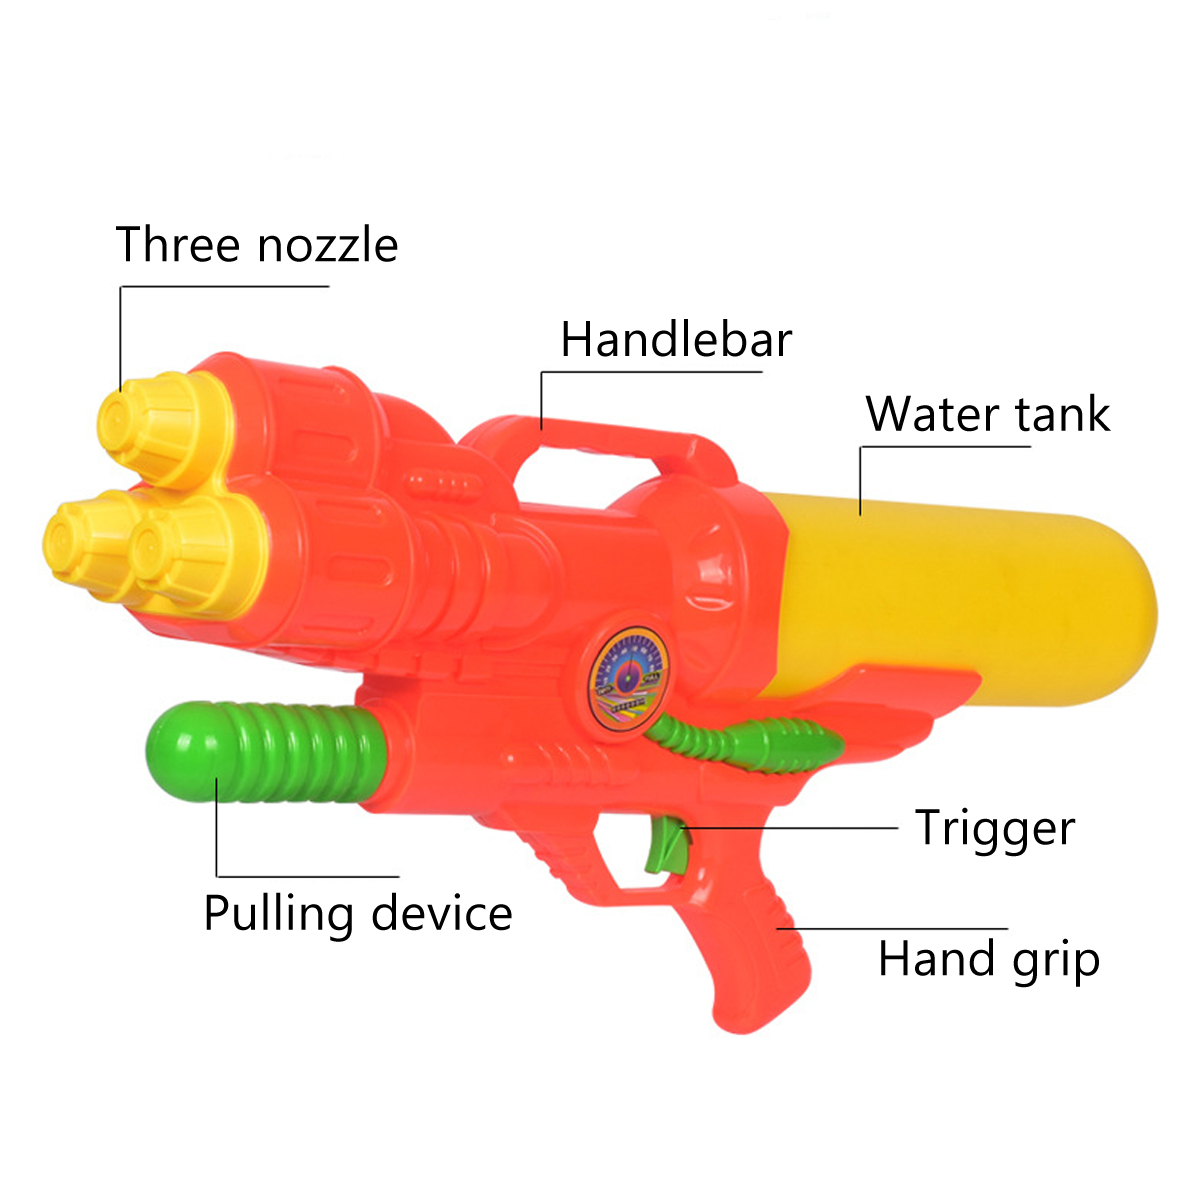 1500ml-Red-Or-Blue-Toy-Water-Sprinkler-With-A-Range-Of-7-9m-Plastic-Water-Sprinkler-For-Children-Bea-1703042-6